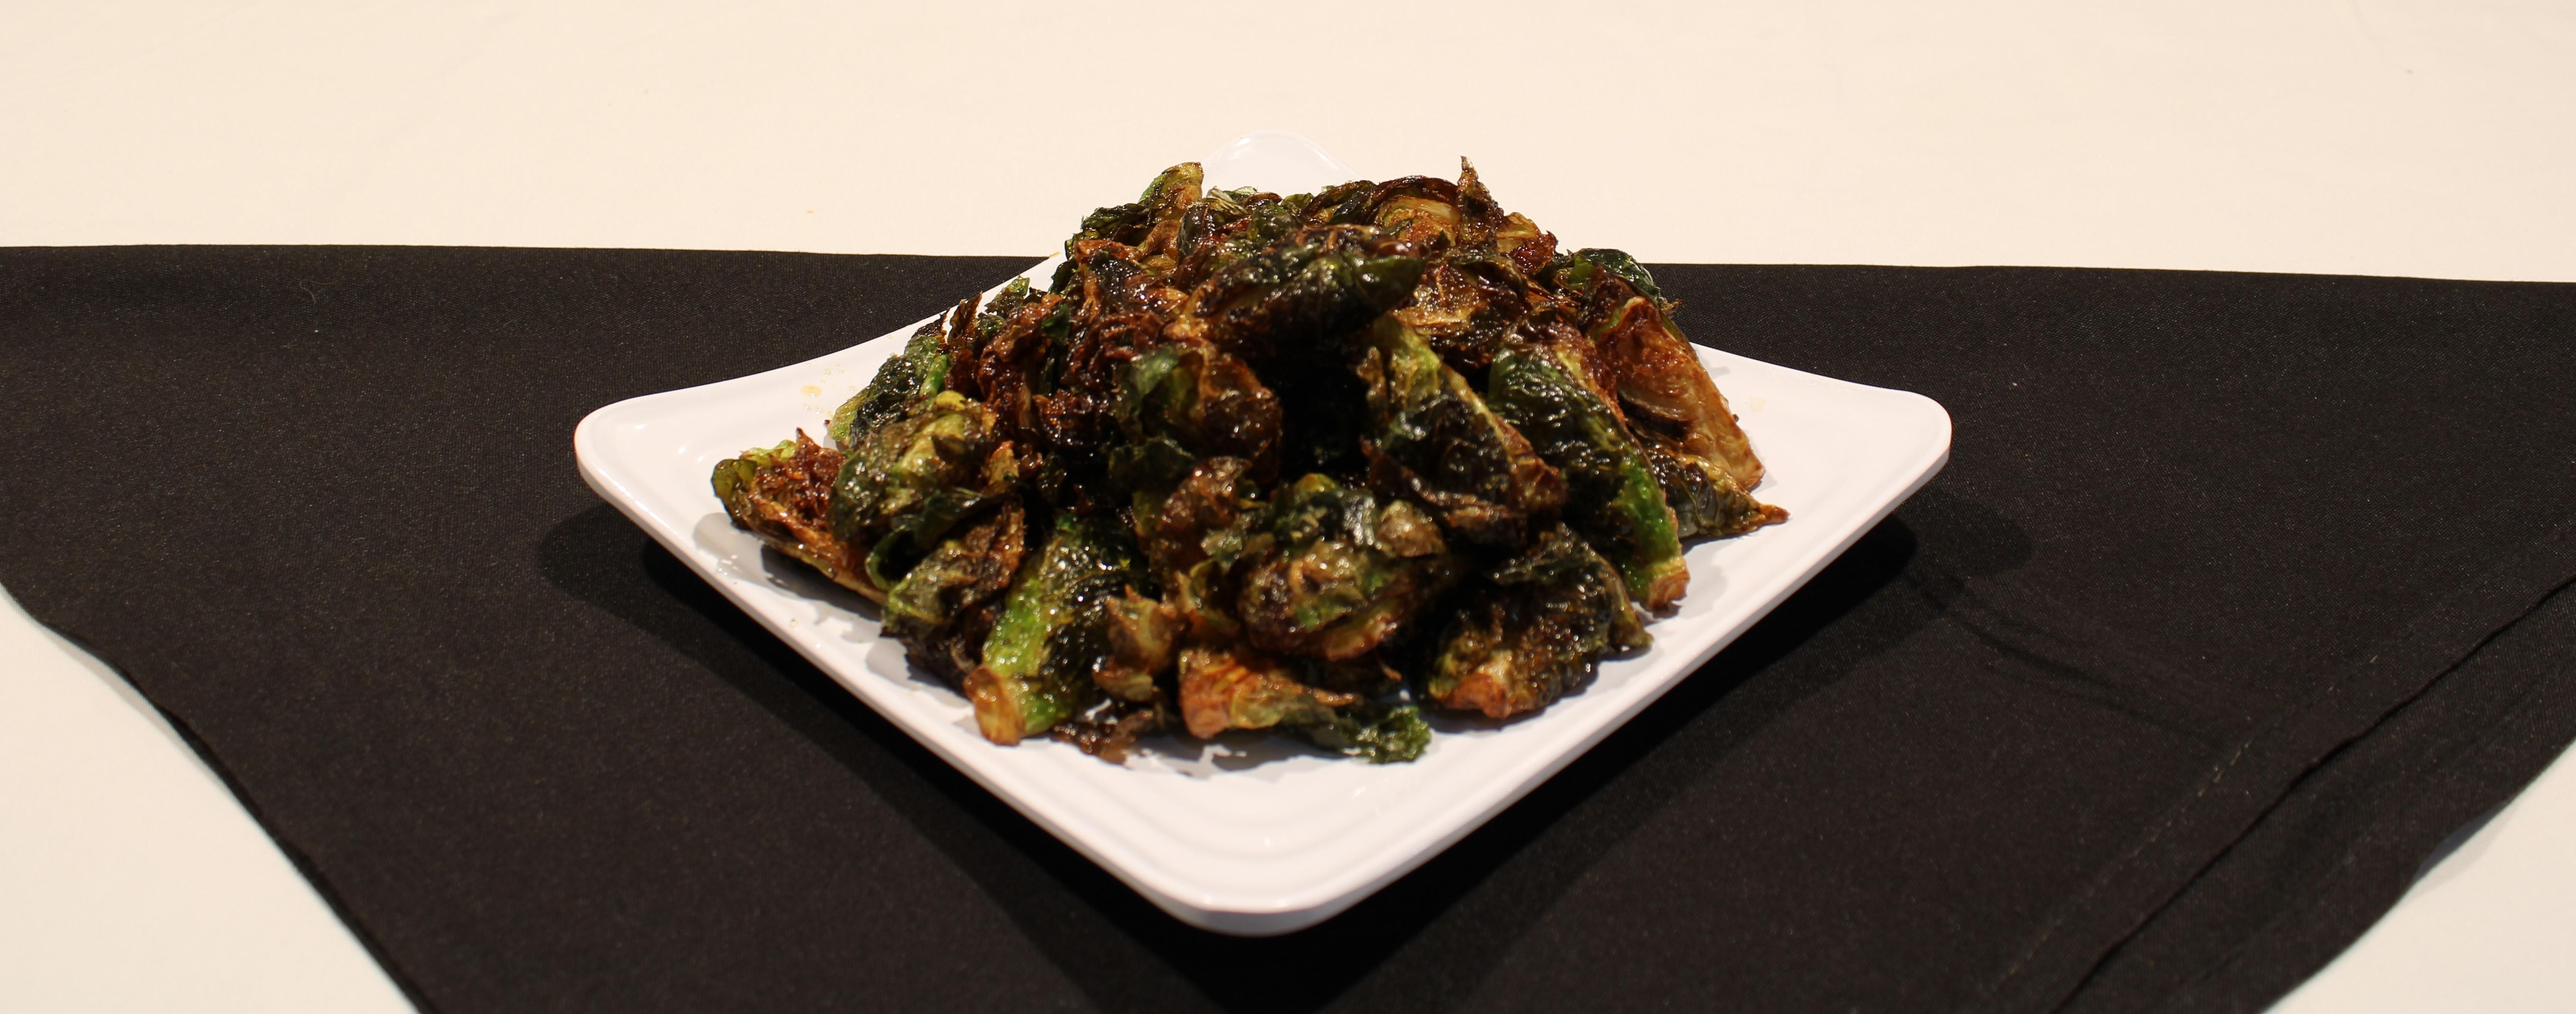 CRISPY BRUSSELS SPROUTS